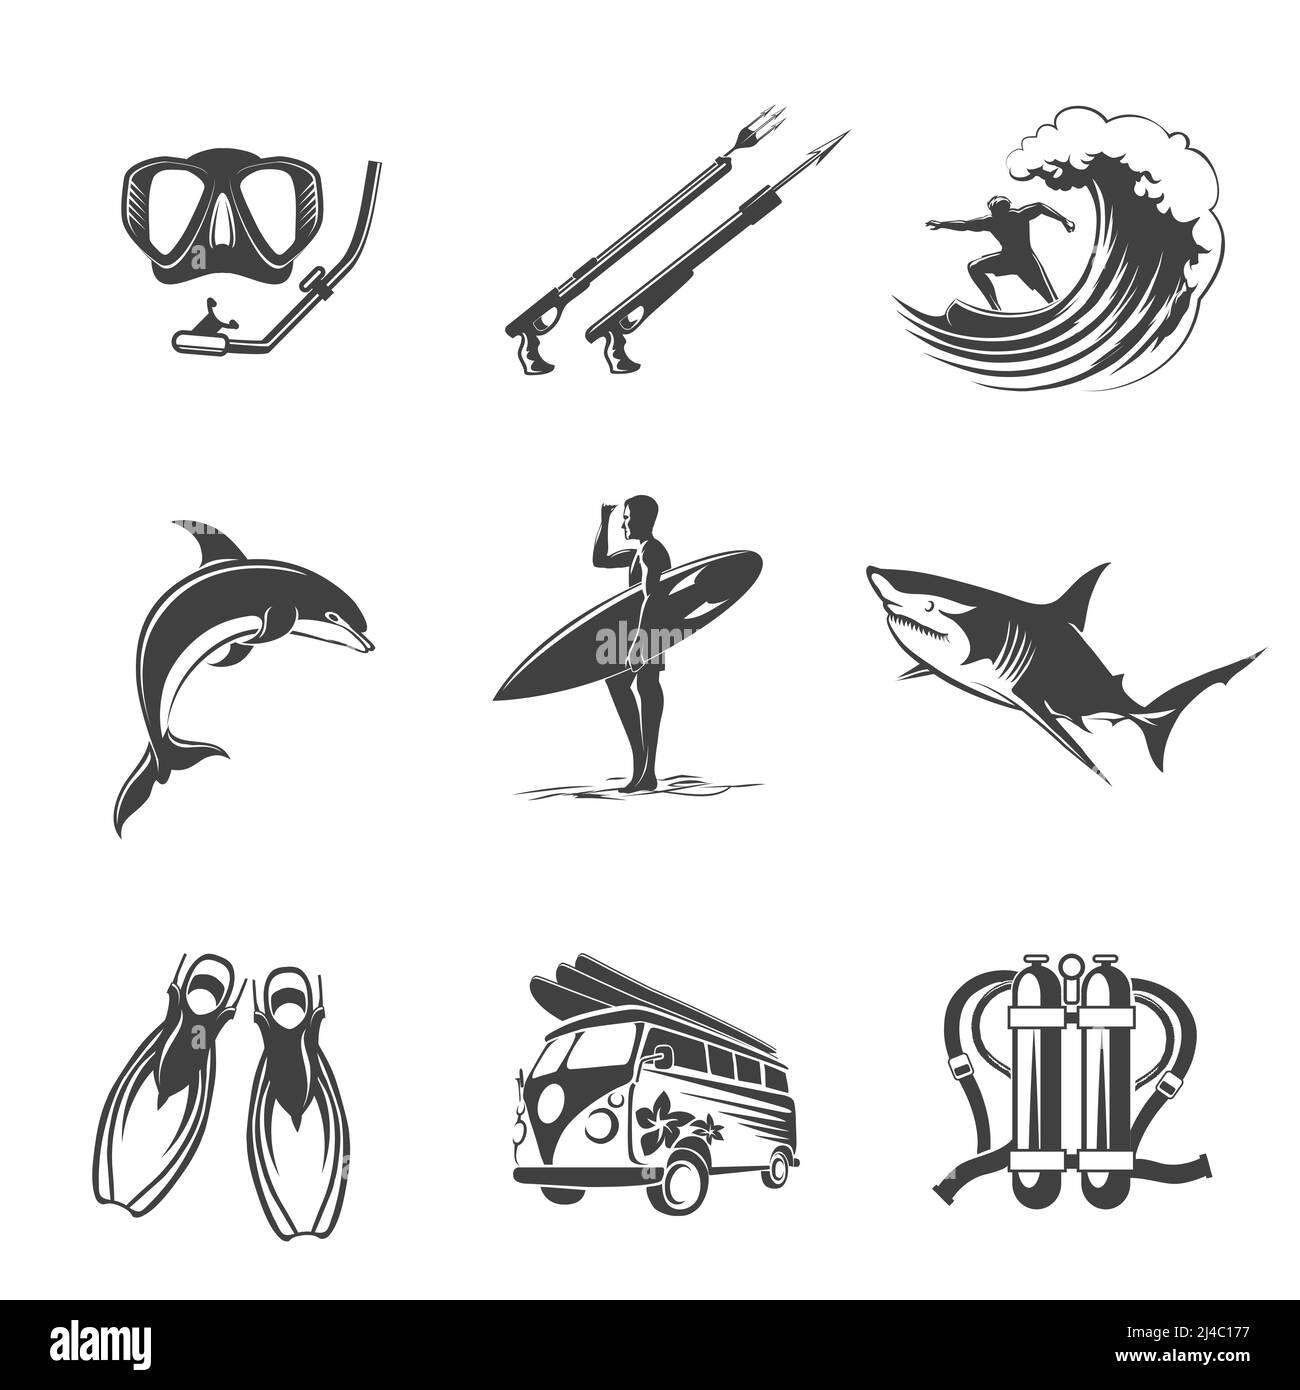 Spear+fishing Stock Vector Images - Alamy